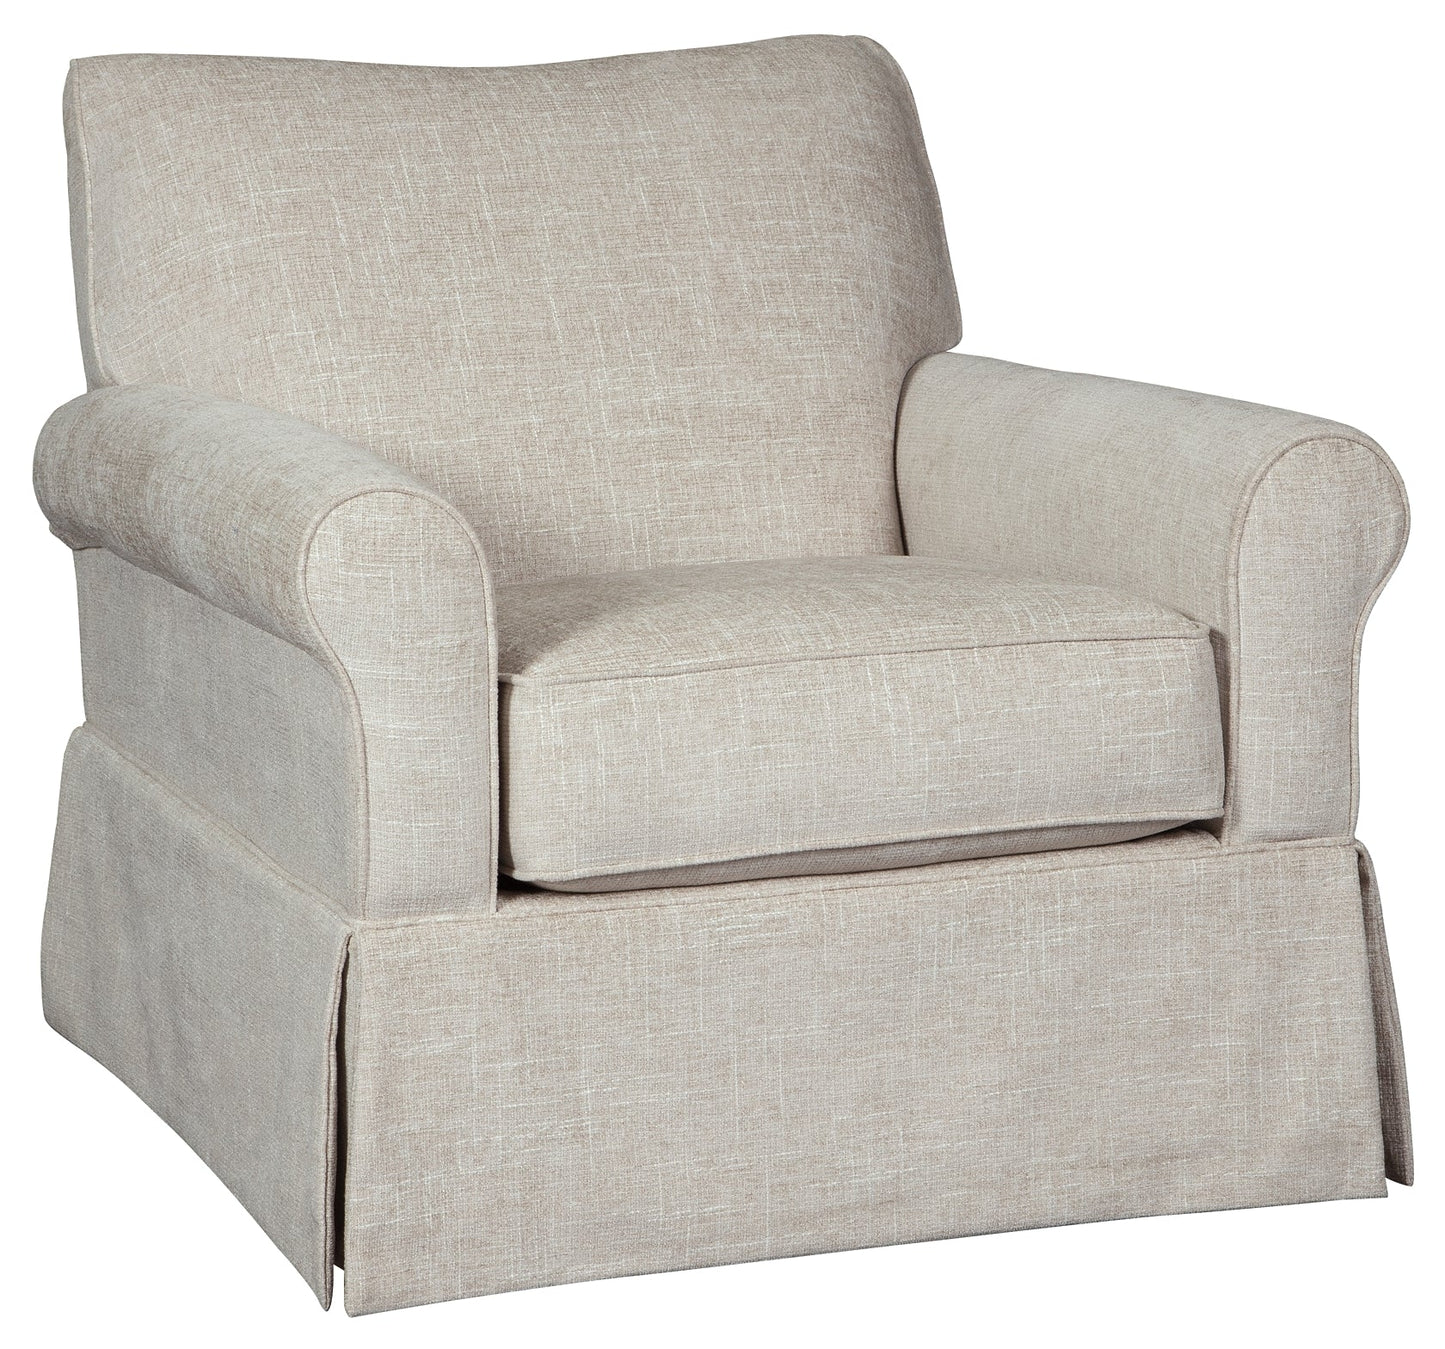 Searcy Swivel Glider Accent Chair at Cloud 9 Mattress & Furniture furniture, home furnishing, home decor